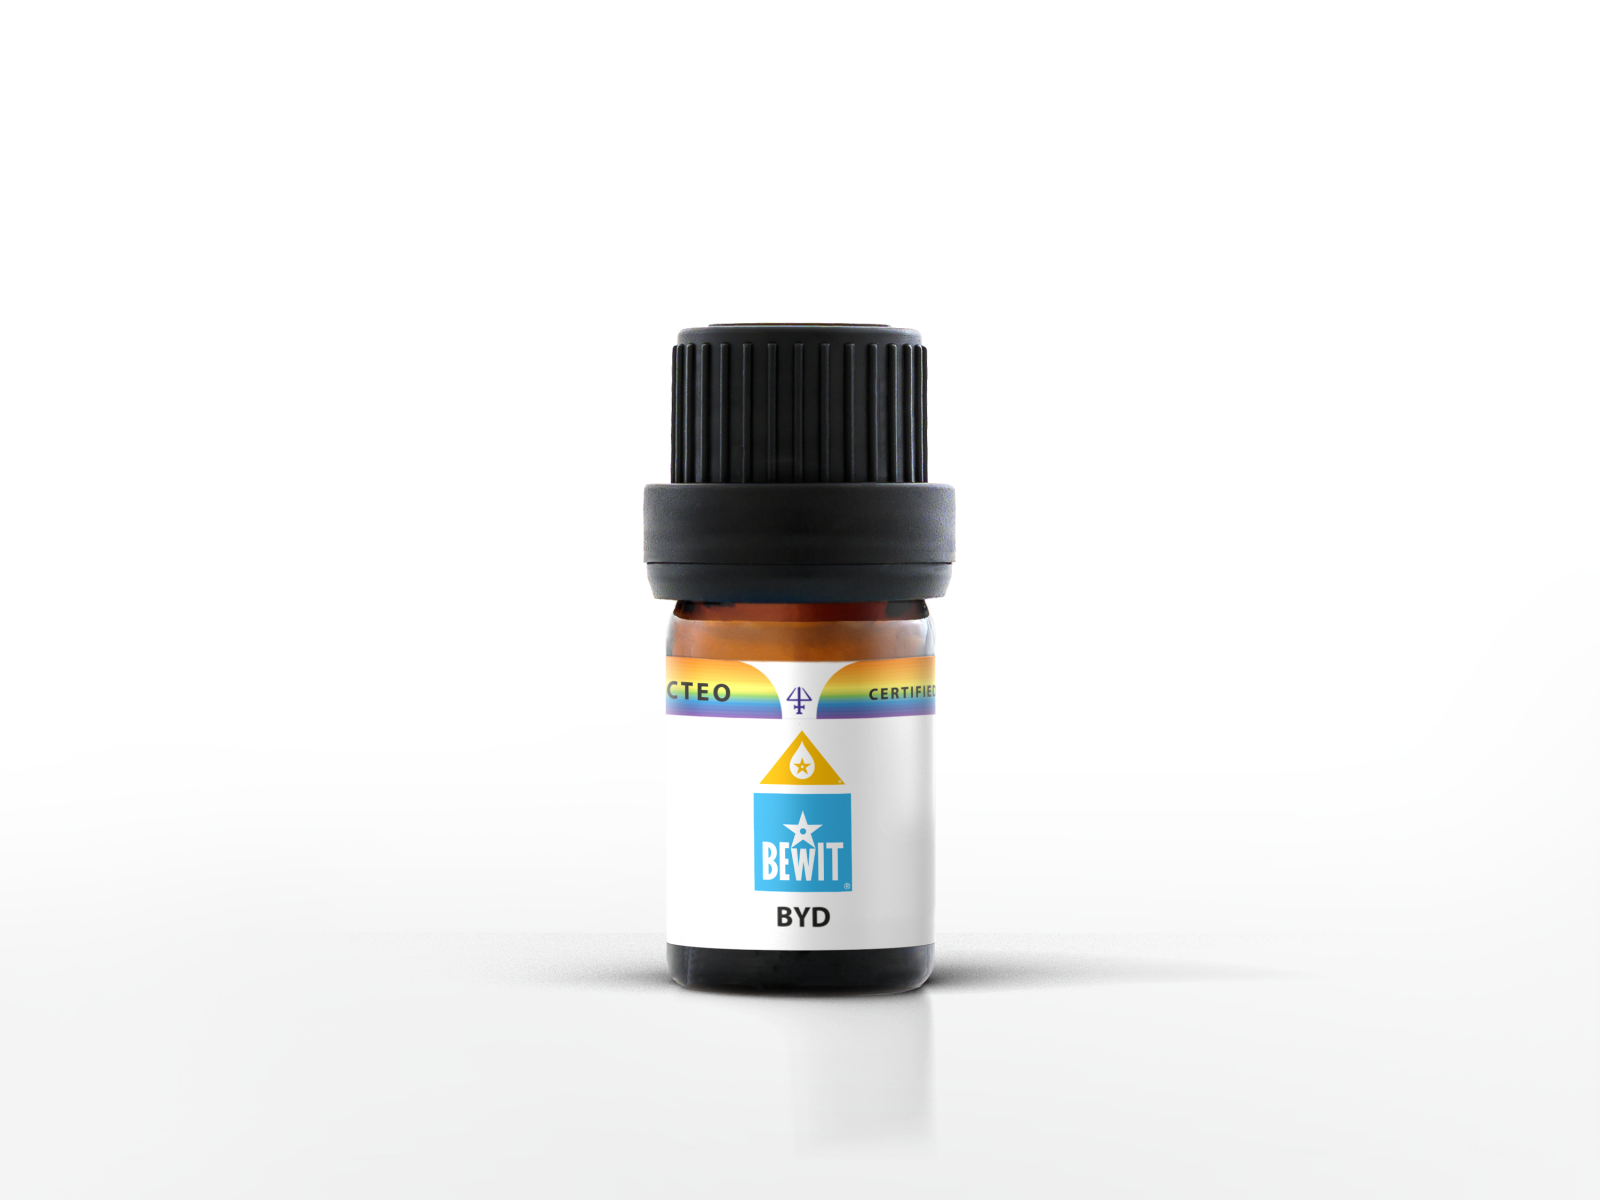 BEWIT BYD - A unique blend of essential oils - 2